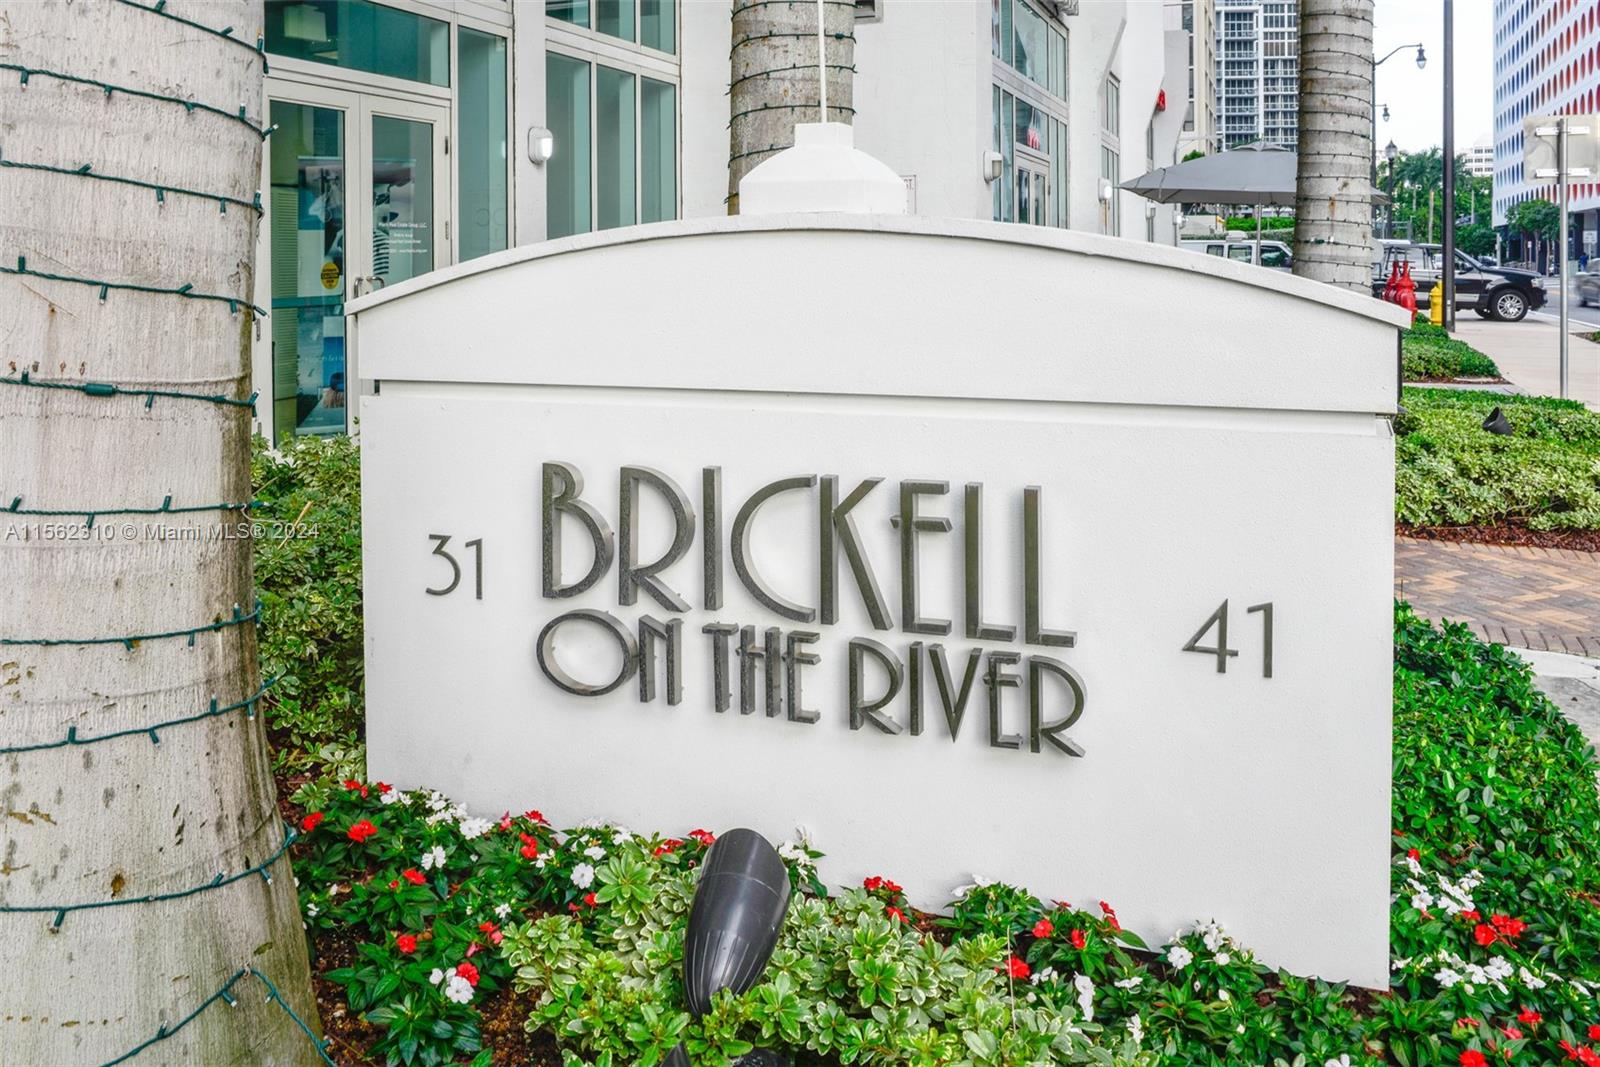 Brickell on the River South image #33